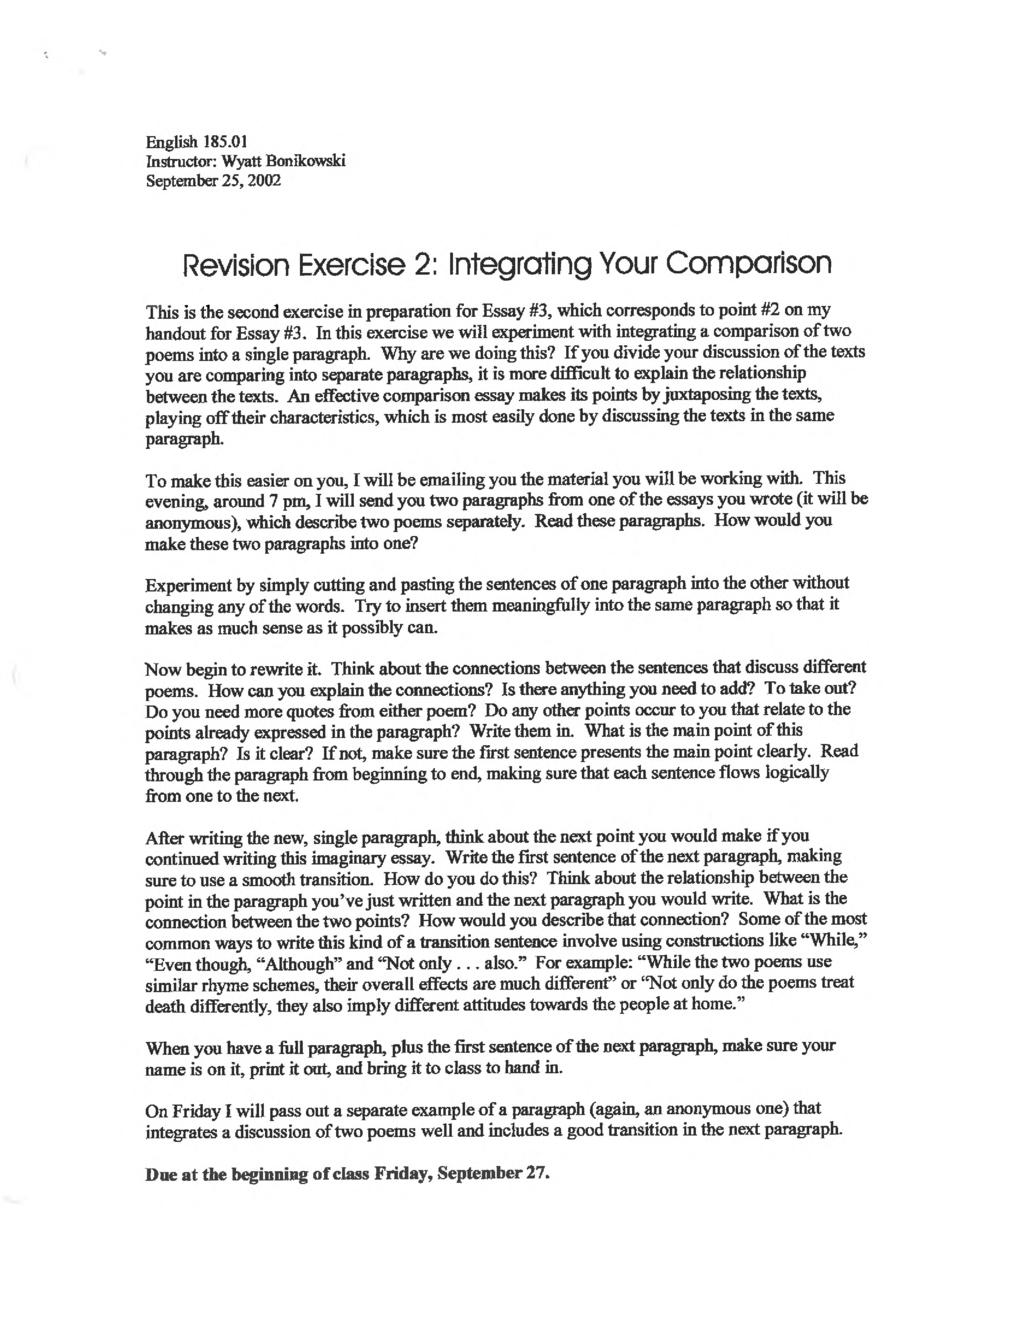 Revision Exercise 2: Integrating Your Comparison This is the second exercise in preparation for Essay #3, which corresponds to point #2 on my handout for Essay #3.